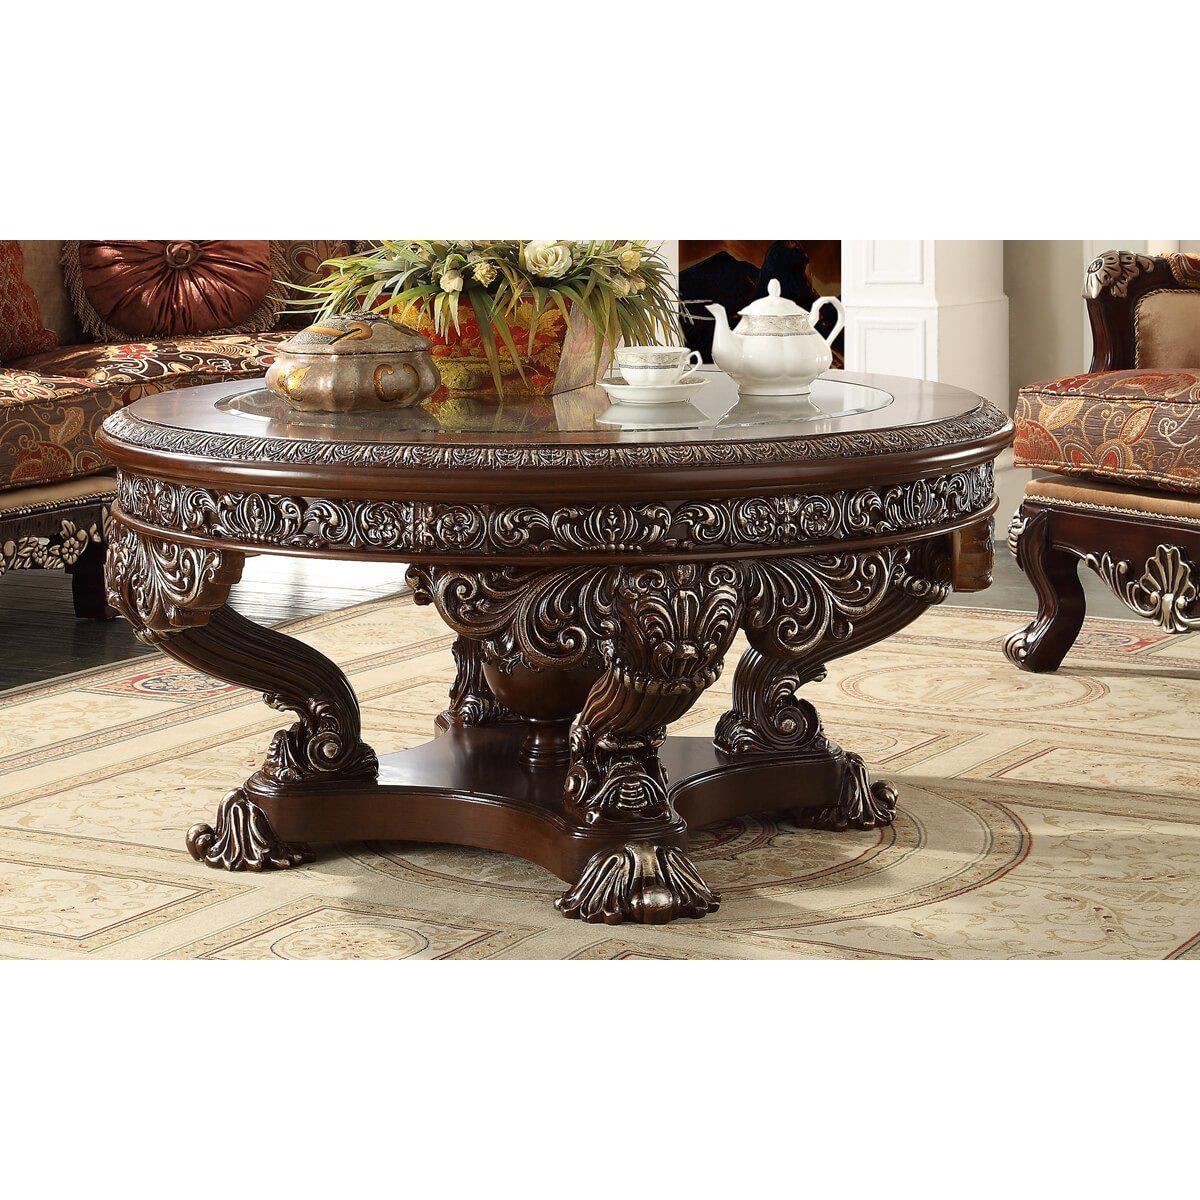 Homey Design Luxury Hd-8017 - Coffee Table-Iron Home Concepts